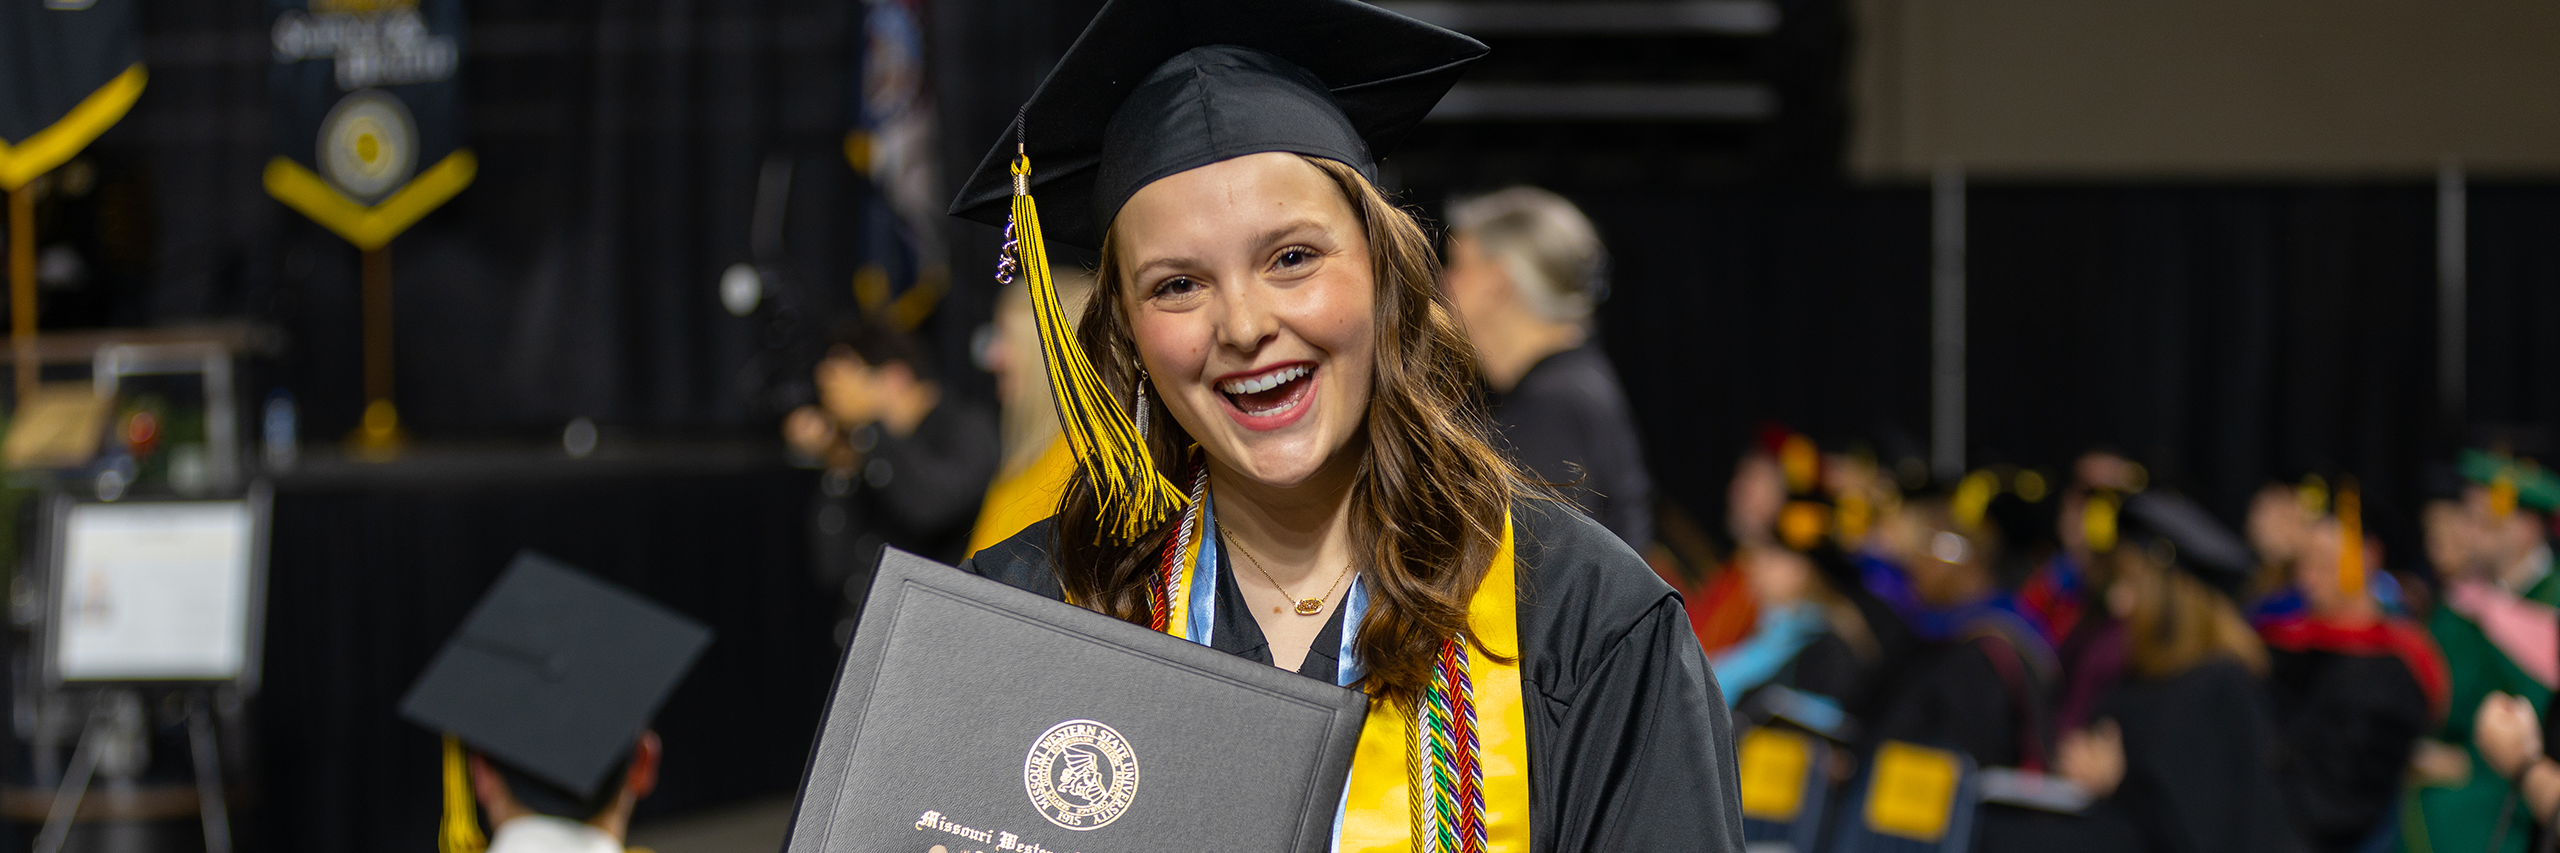 taylor edwards holding her diploma and smiling at commencement